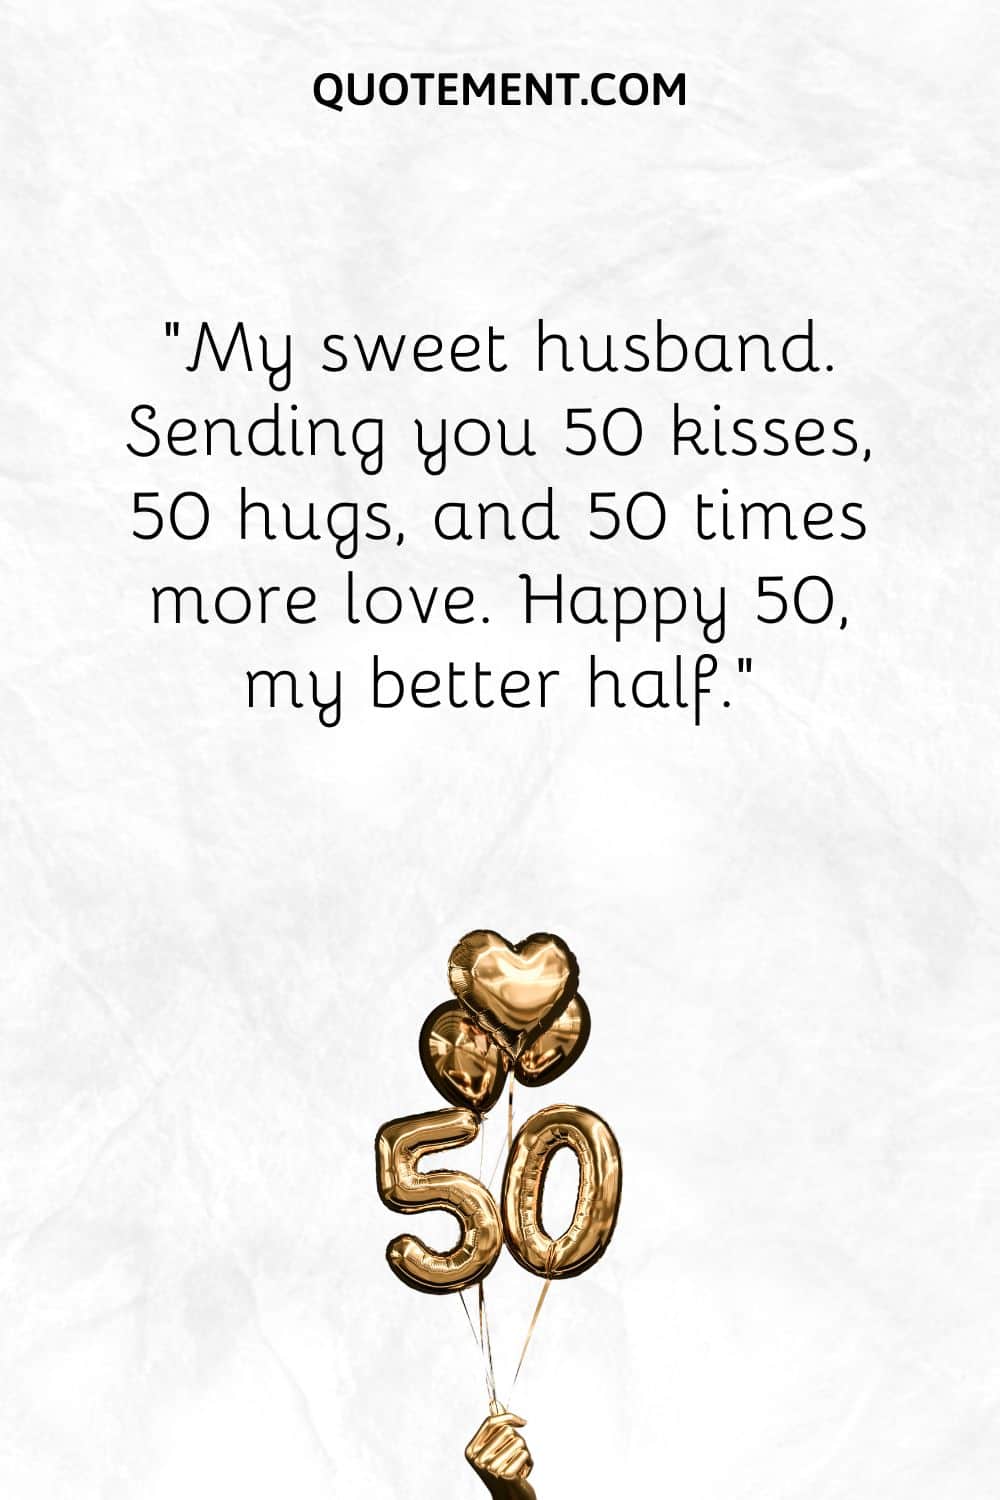 “My sweet husband. Sending you 50 kisses, 50 hugs, and 50 times more love. Happy 50, my better half.”